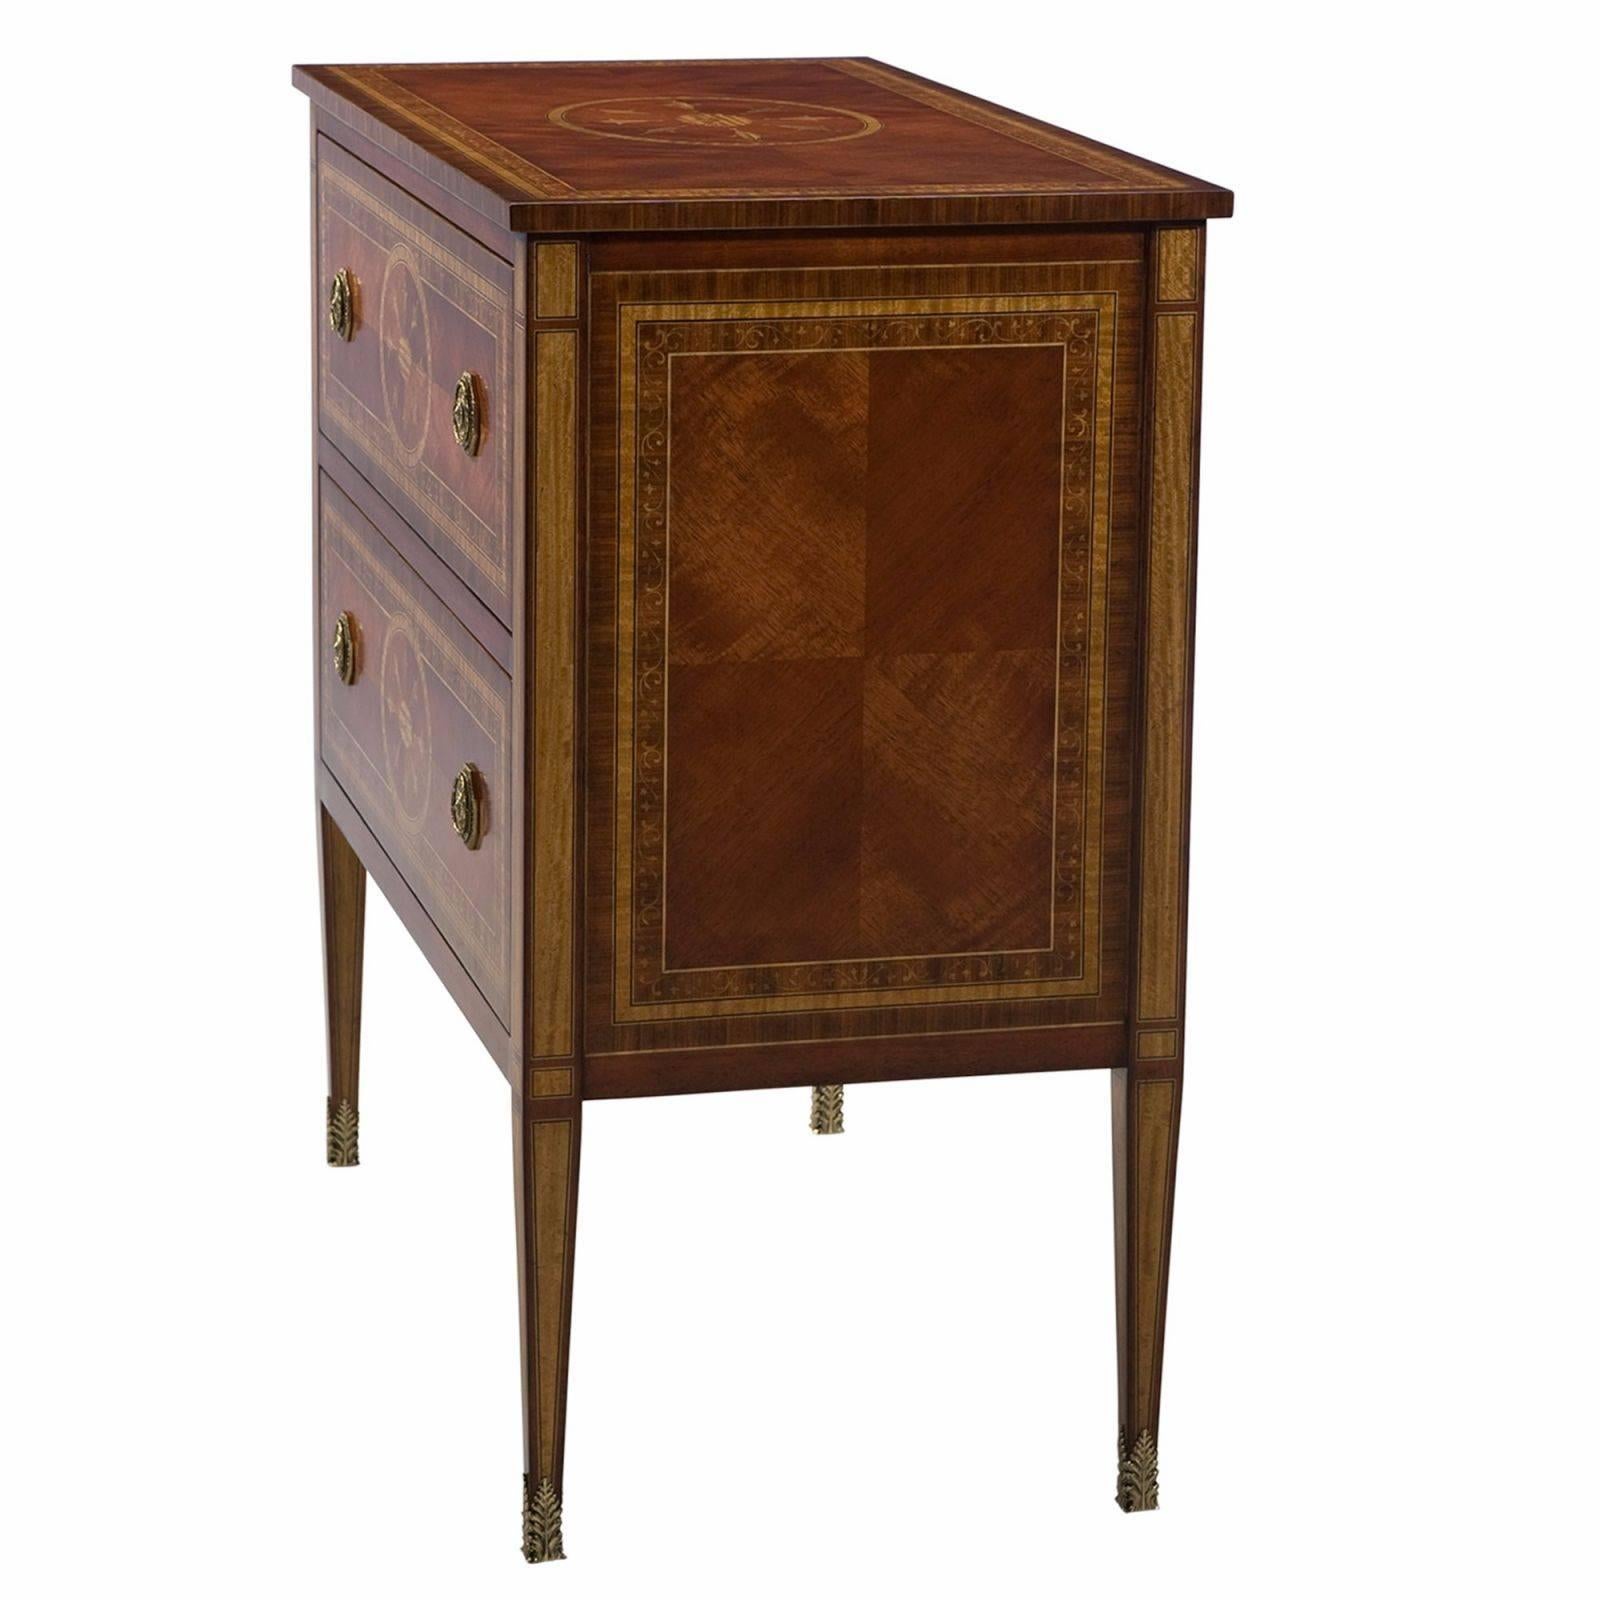 A very finely hand inlaid Santo Domingo rosewood chest of drawers, the rectangular satinwood and rosewood banded top drawers and panels with delicate scrolling vine inlay, the two deep drawers and top inlaid with delicate ovals, the satinwood inlay